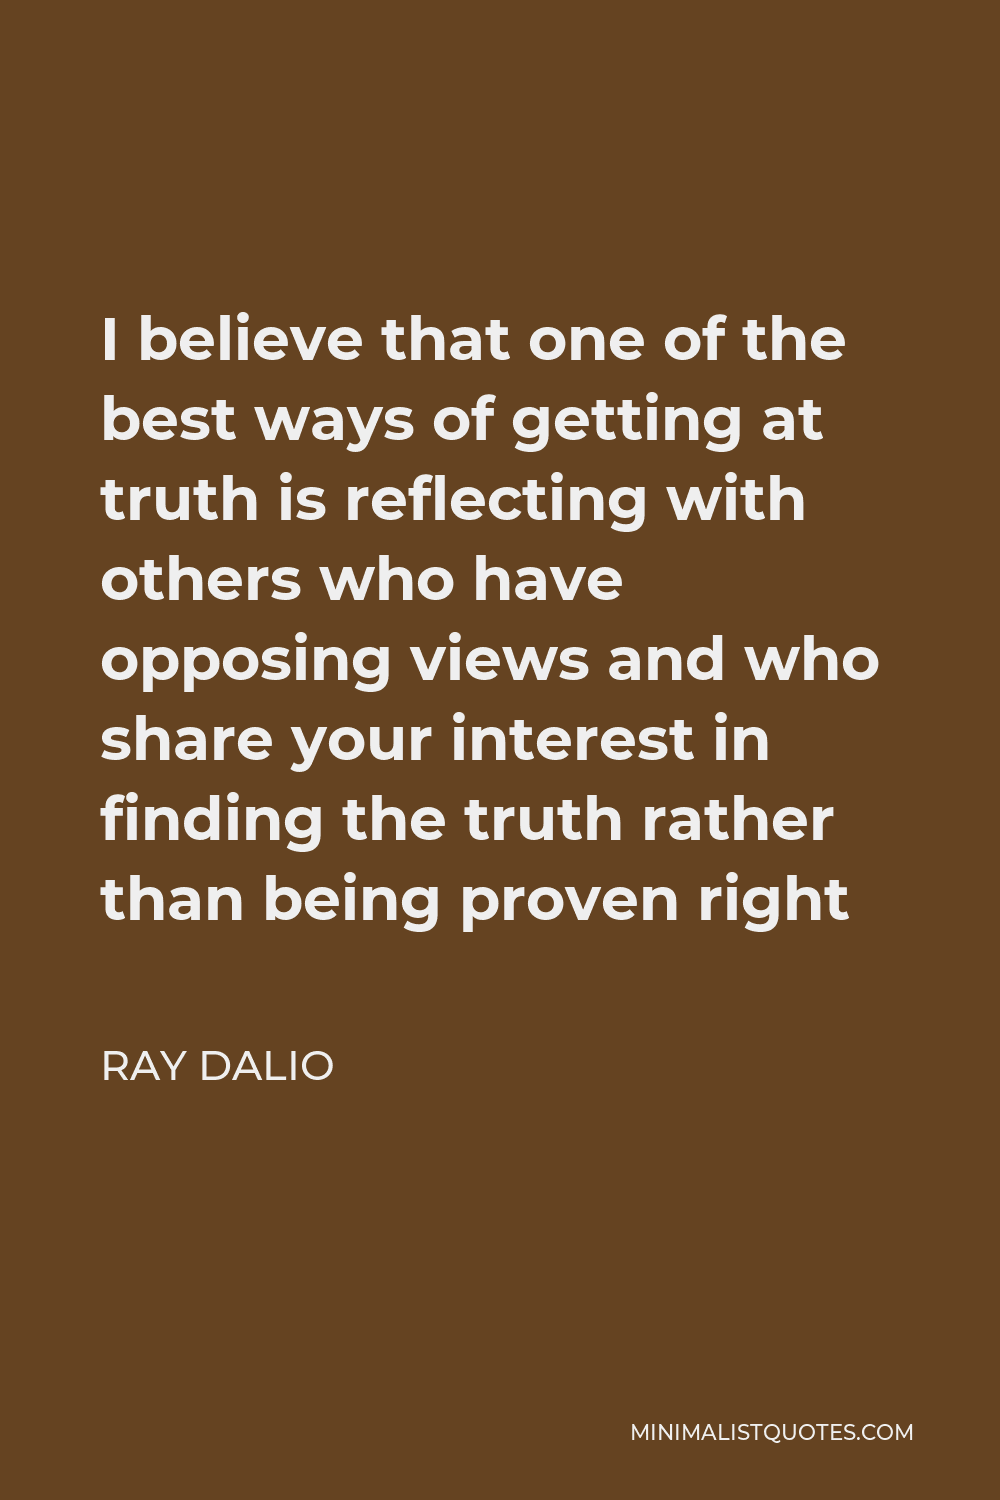 Ray Dalio Quote - I believe that one of the best ways of getting at truth is reflecting with others who have opposing views and who share your interest in finding the truth rather than being proven right